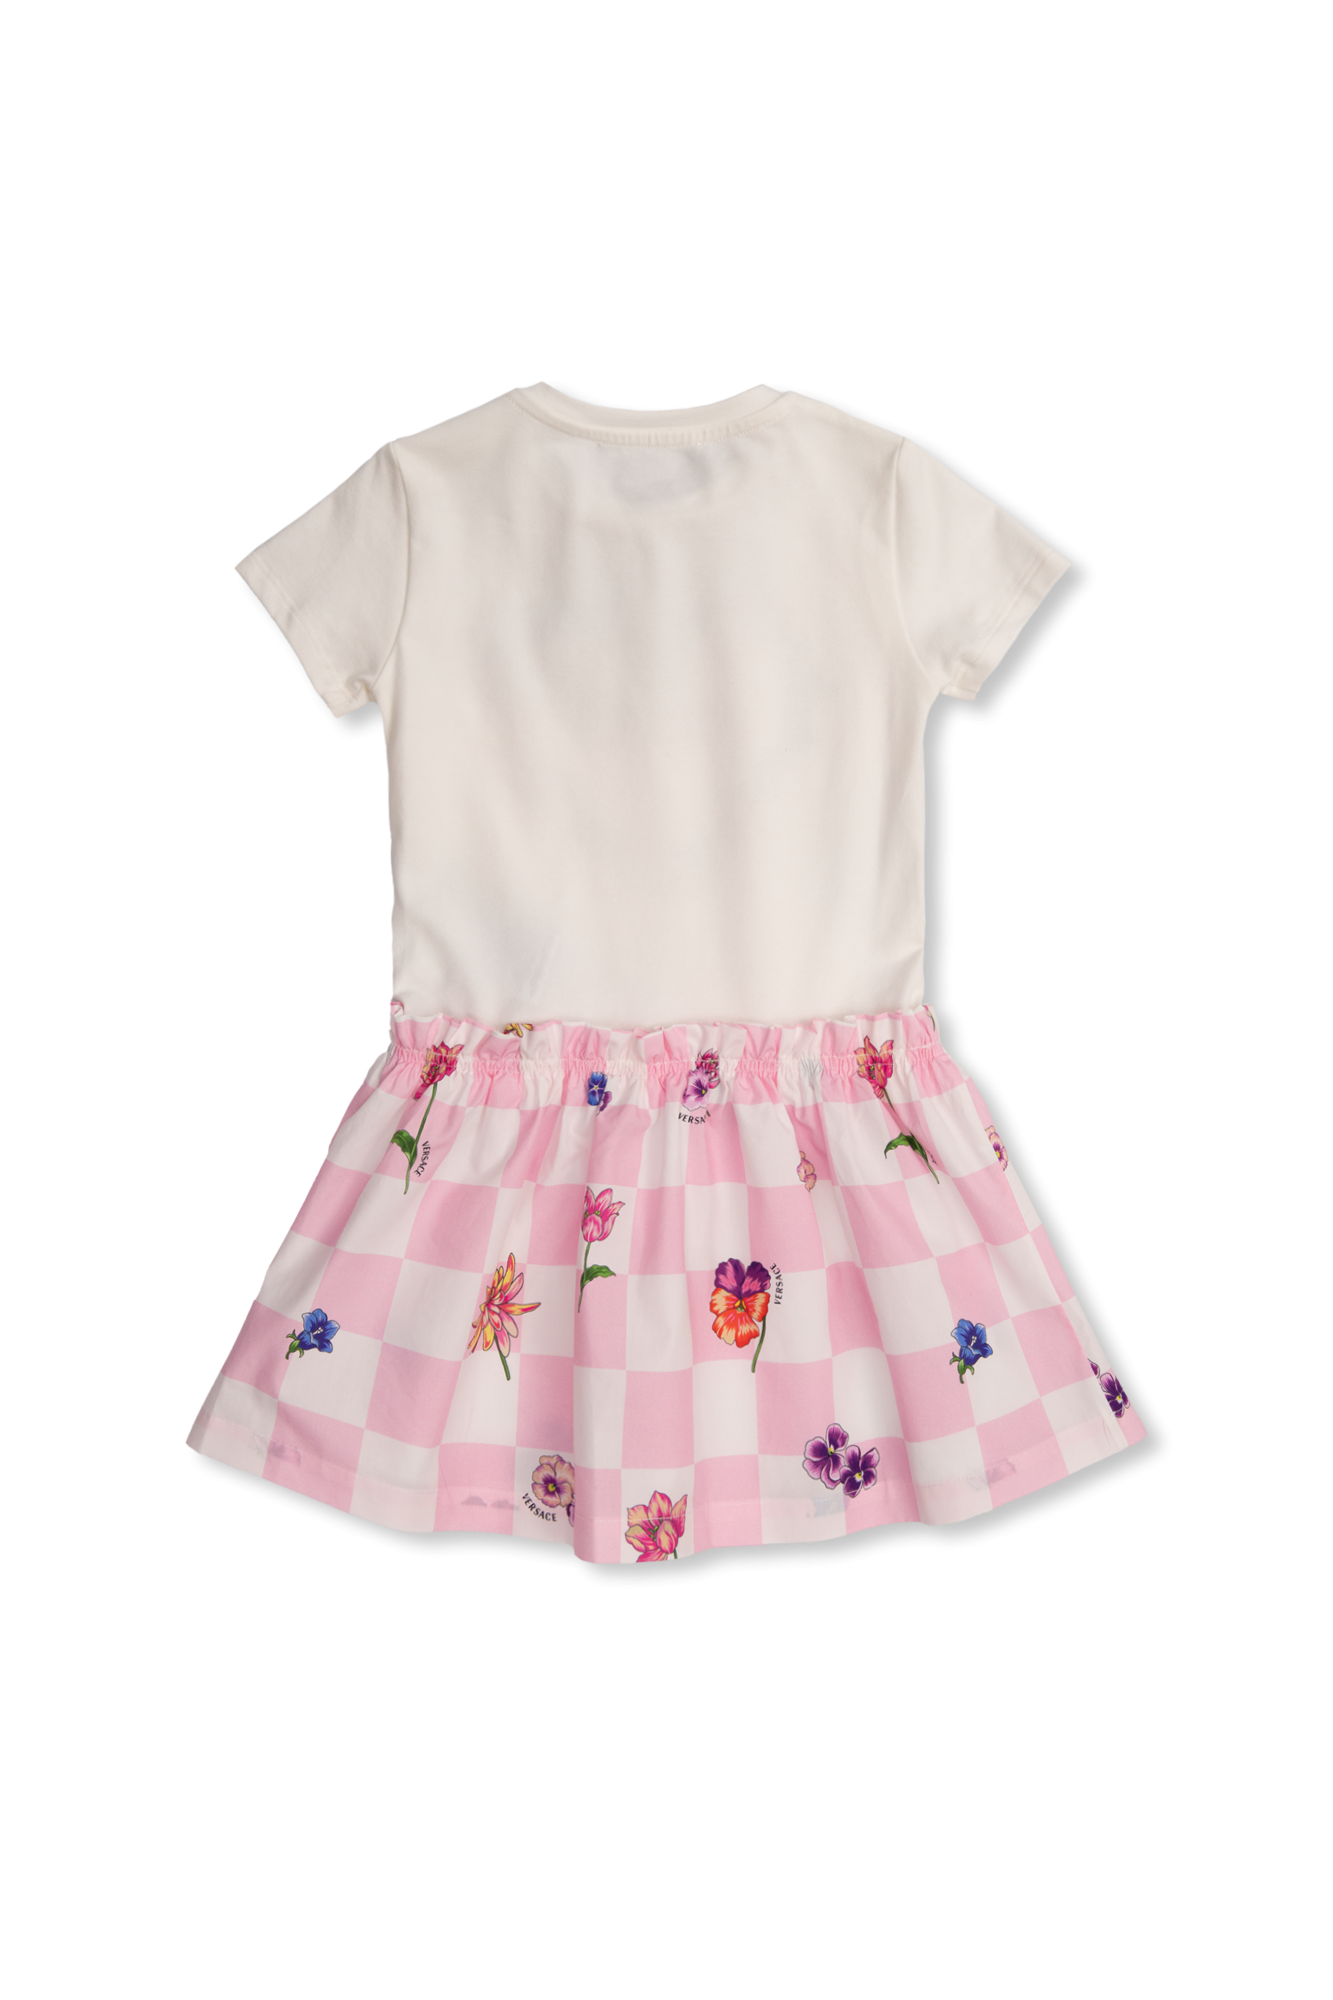 Versace Kids Floral from dress